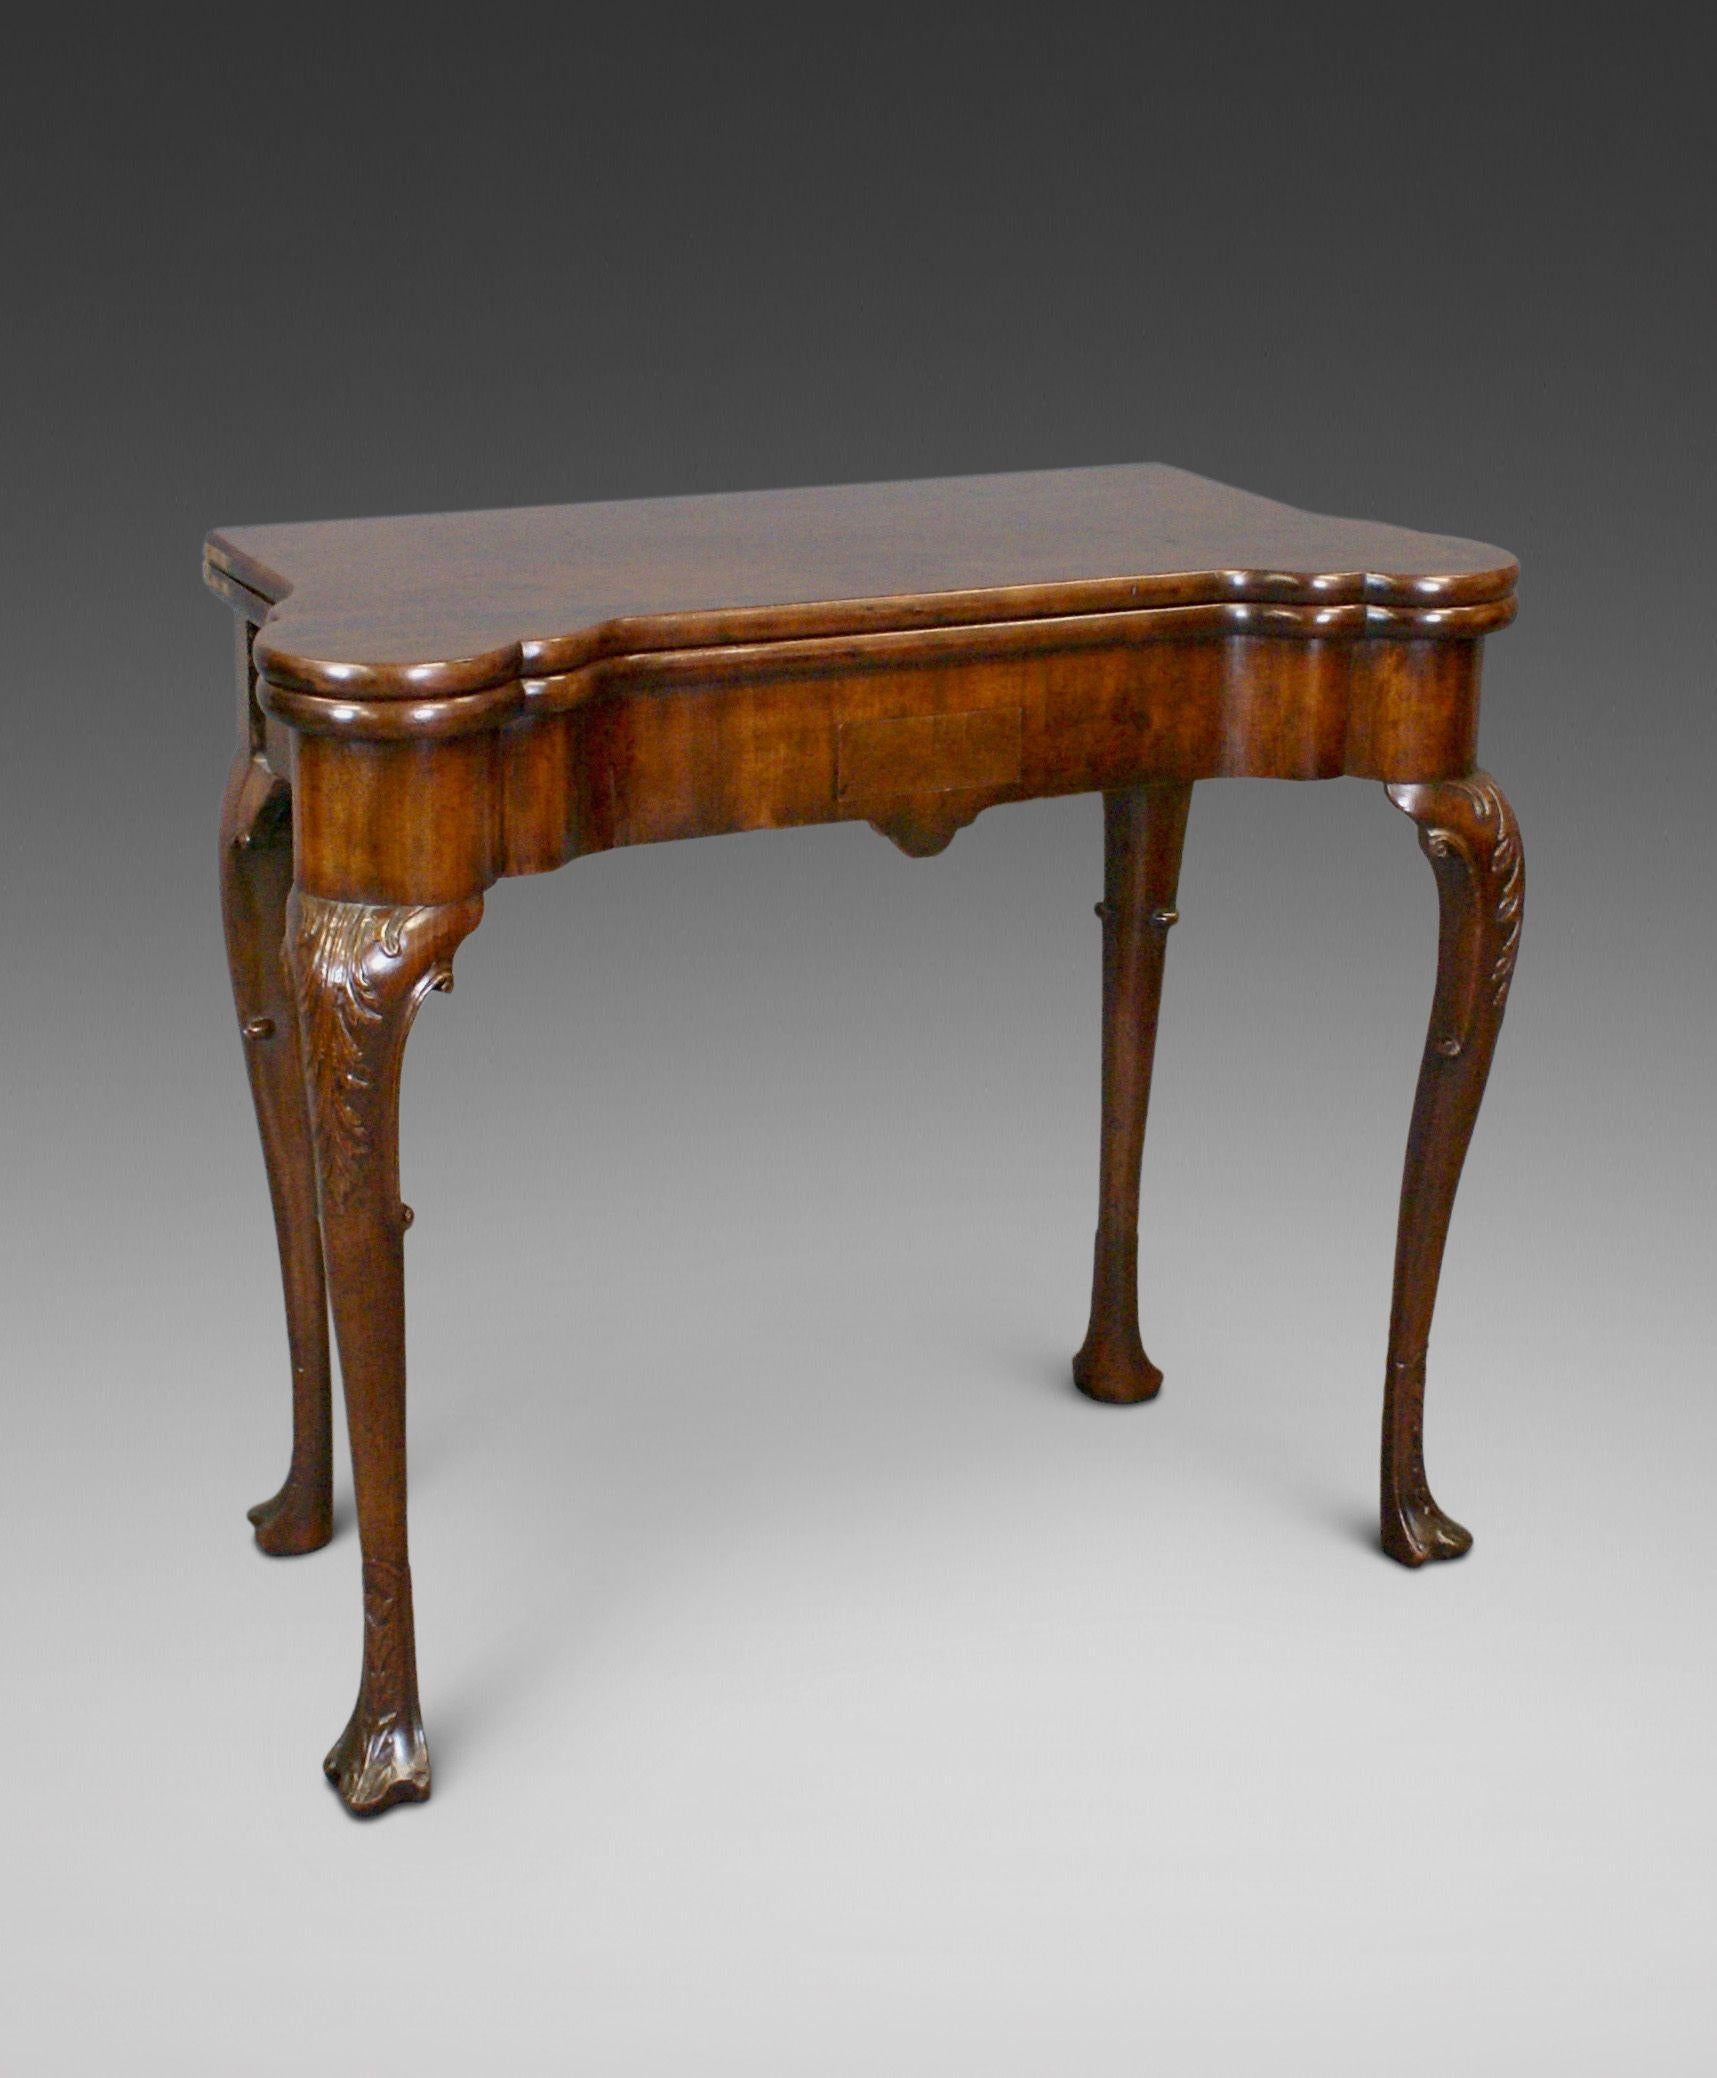 A fine George II Period mahogany carved cabriole leg tea table. Raised on cabriole legs with acanthus leaf carved knees and pad feet. The boldly shaped frieze has a small oak lined drawer and the top is of 